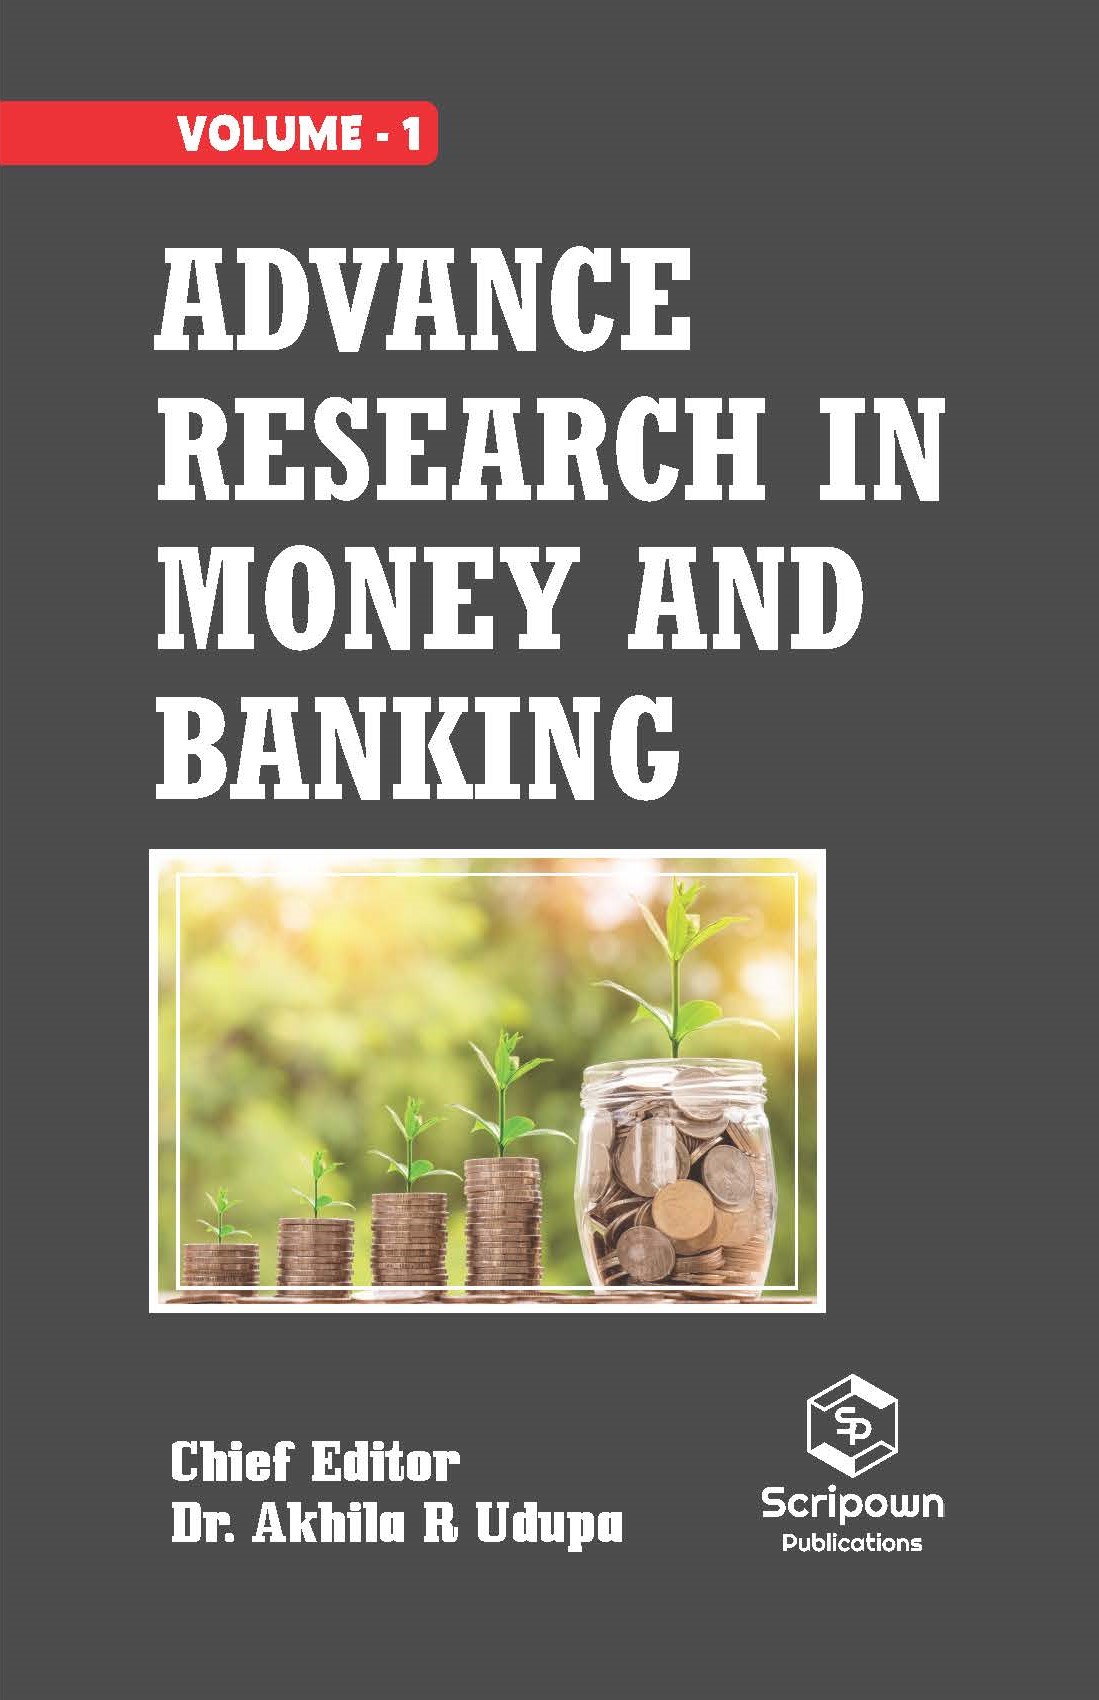 Advance Research in Money and Banking (Volume - 1)